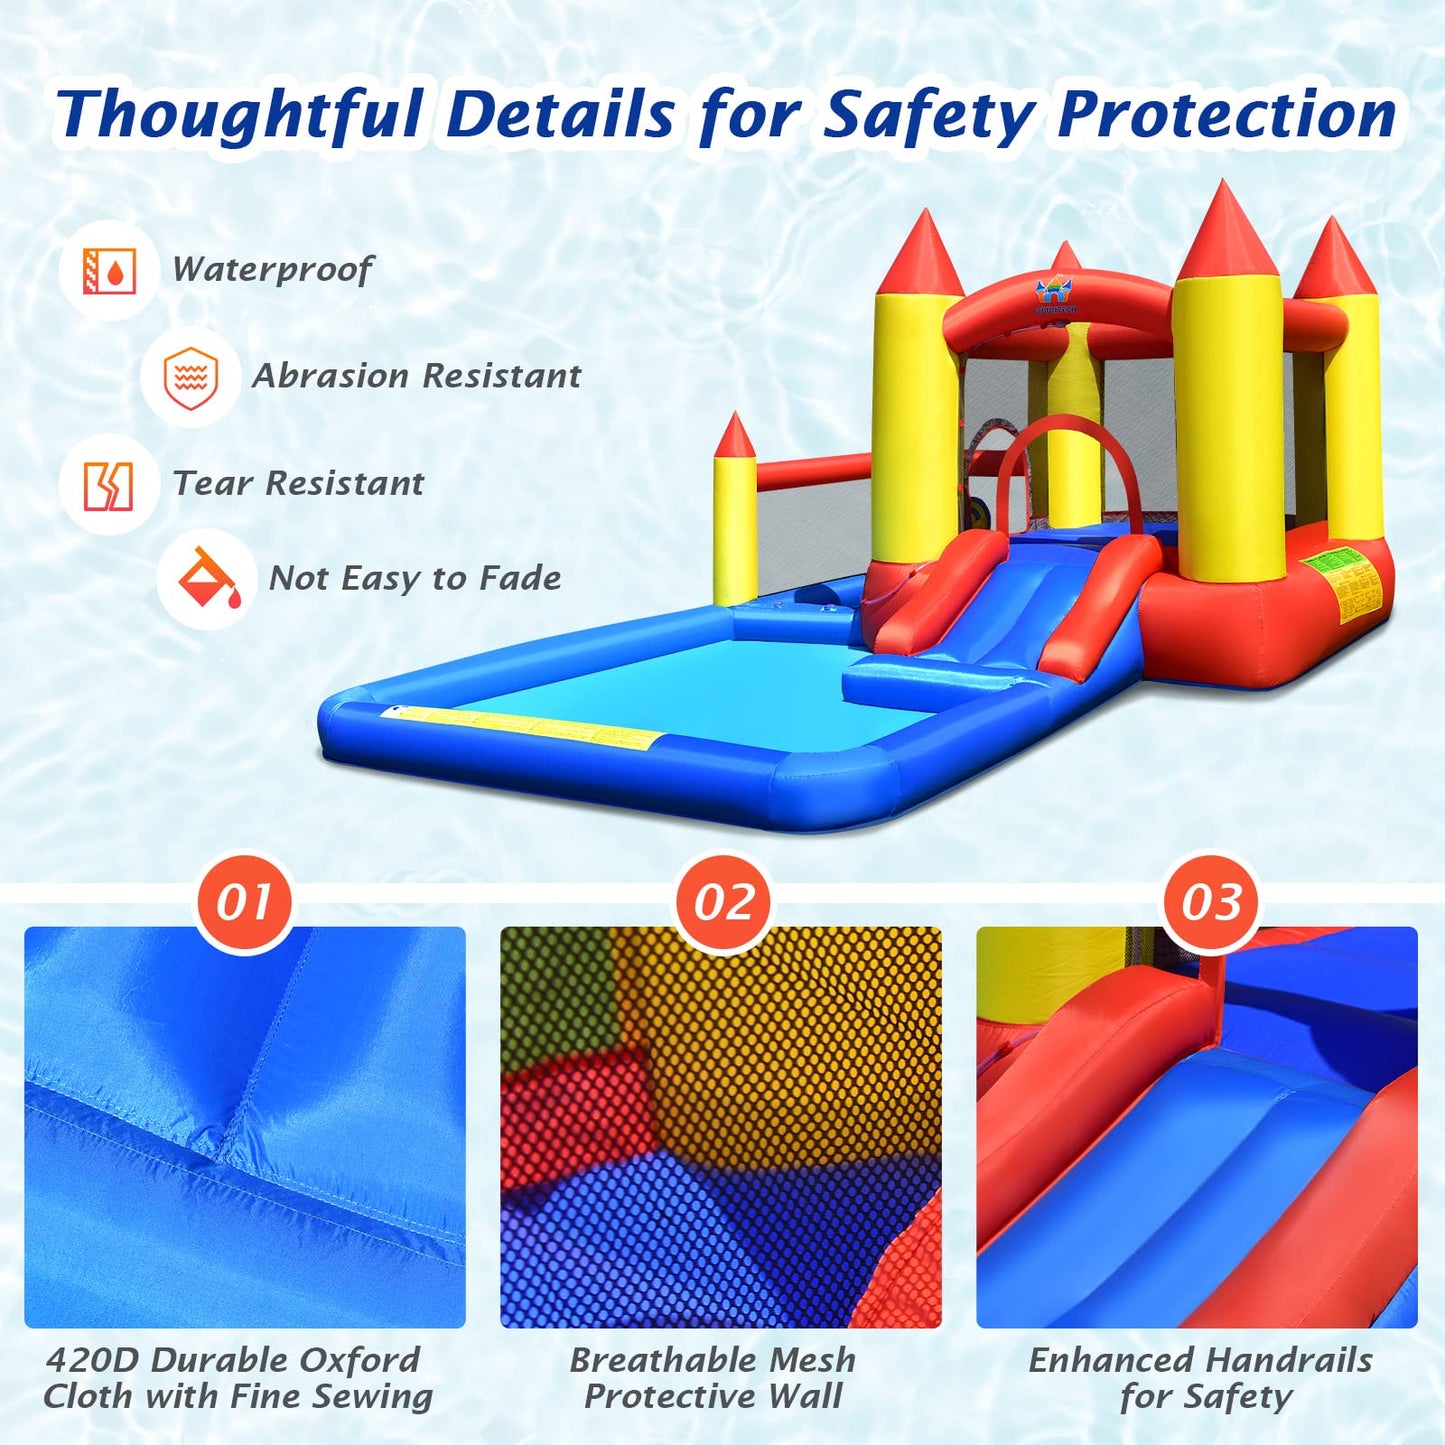 BOUNTECH Inflatable Water Bounce House, Giant Waterslide Park for Kids Backyard Fun Wet and Dry w/Splash Pool, Blow up Water Slides Inflatables for Kids and Adults Outdoor Party Gifts Castle without 480W Air Blower